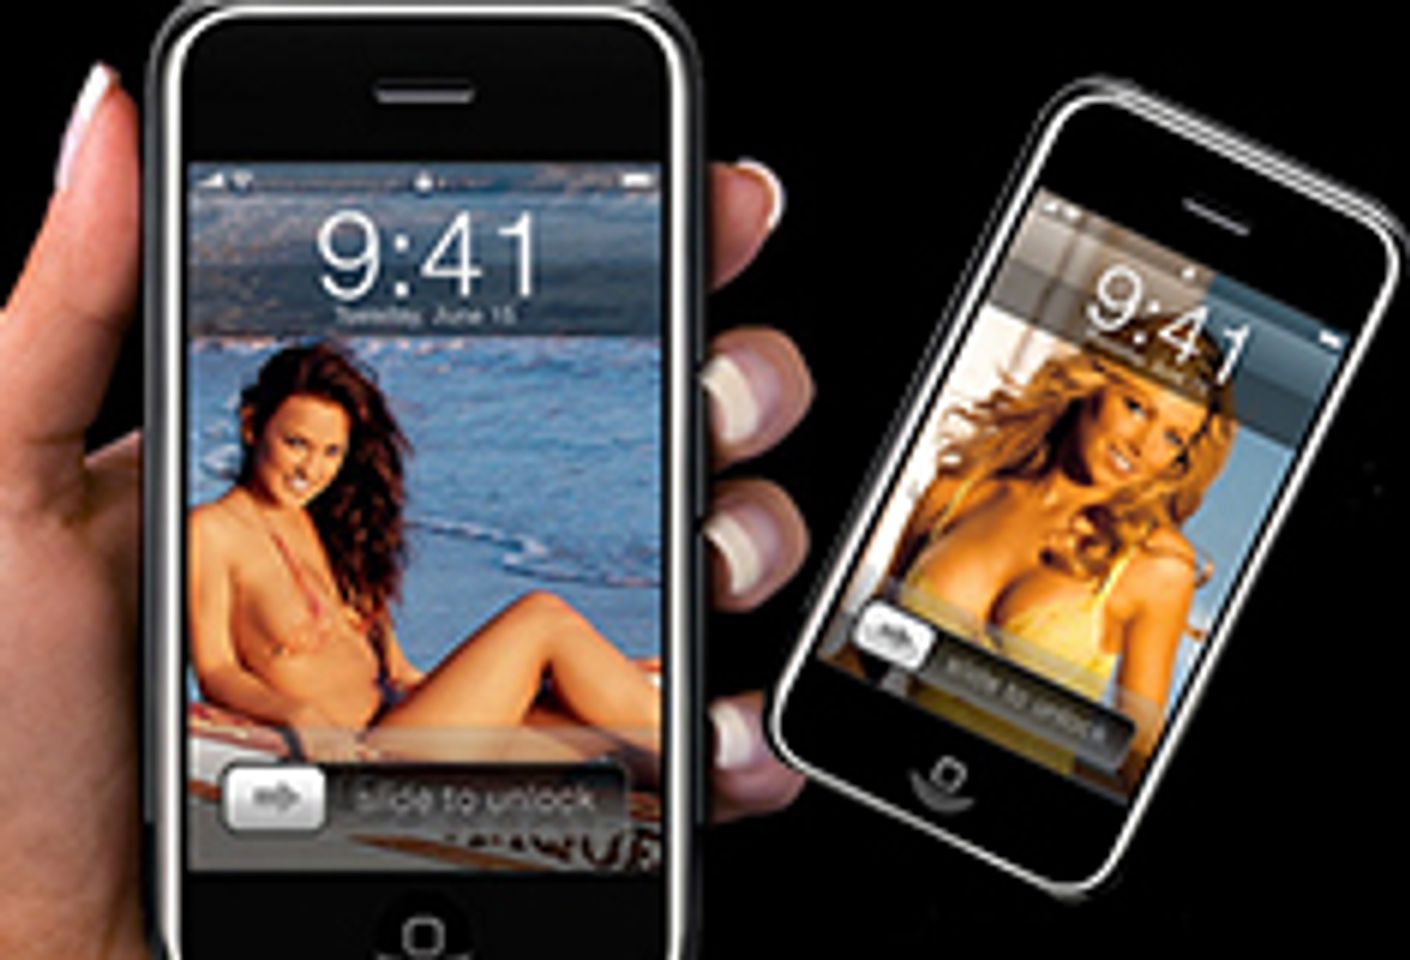 Playboy Offers iPhone Content